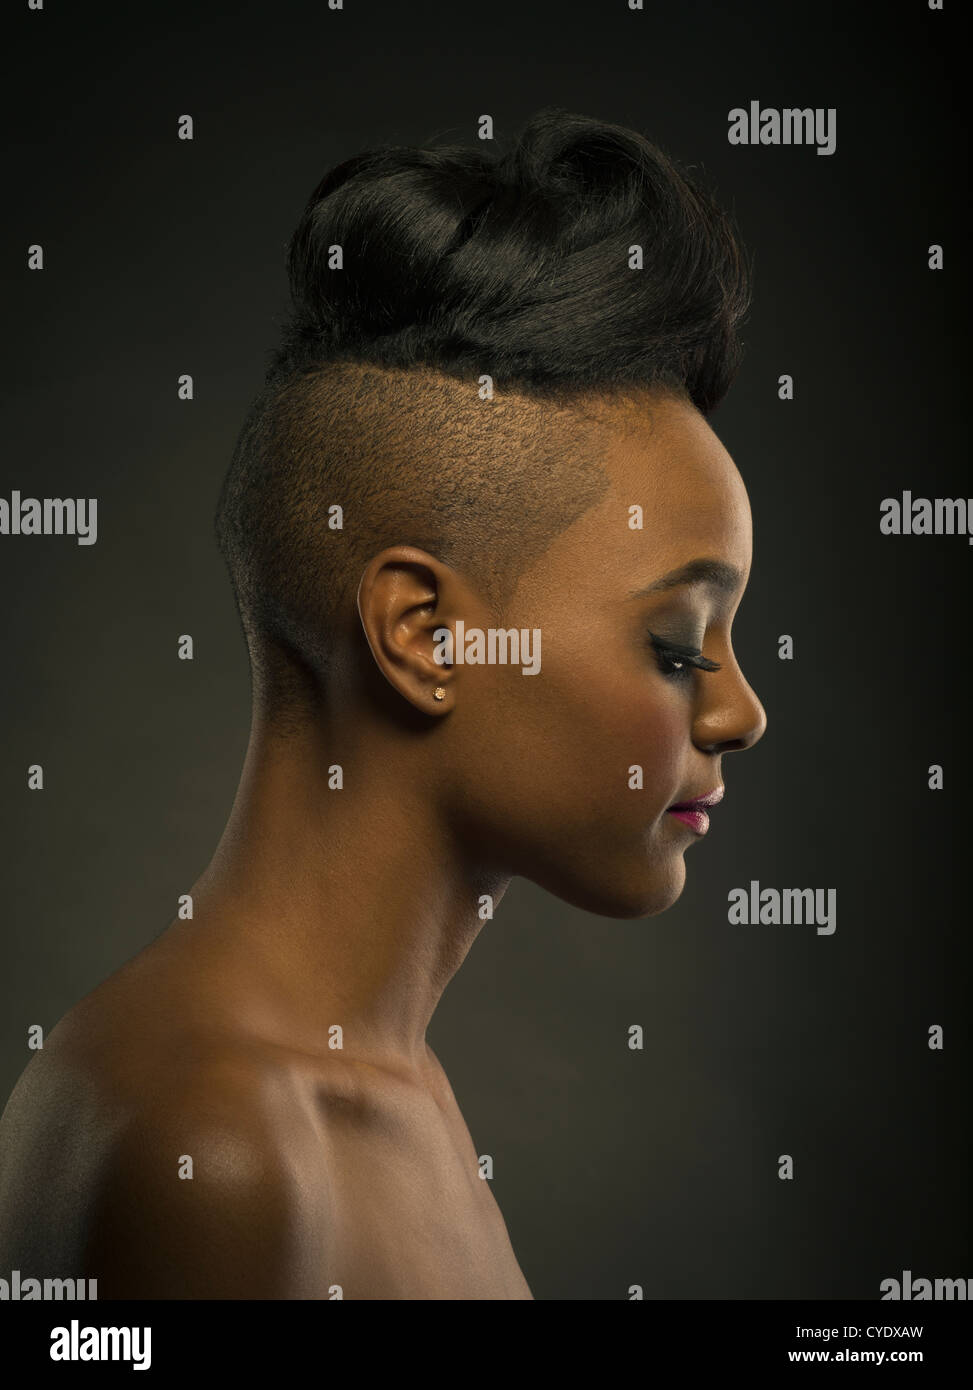 Woman with stylish haircut - head shaved at sides and long hair on top  Stock Photo - Alamy